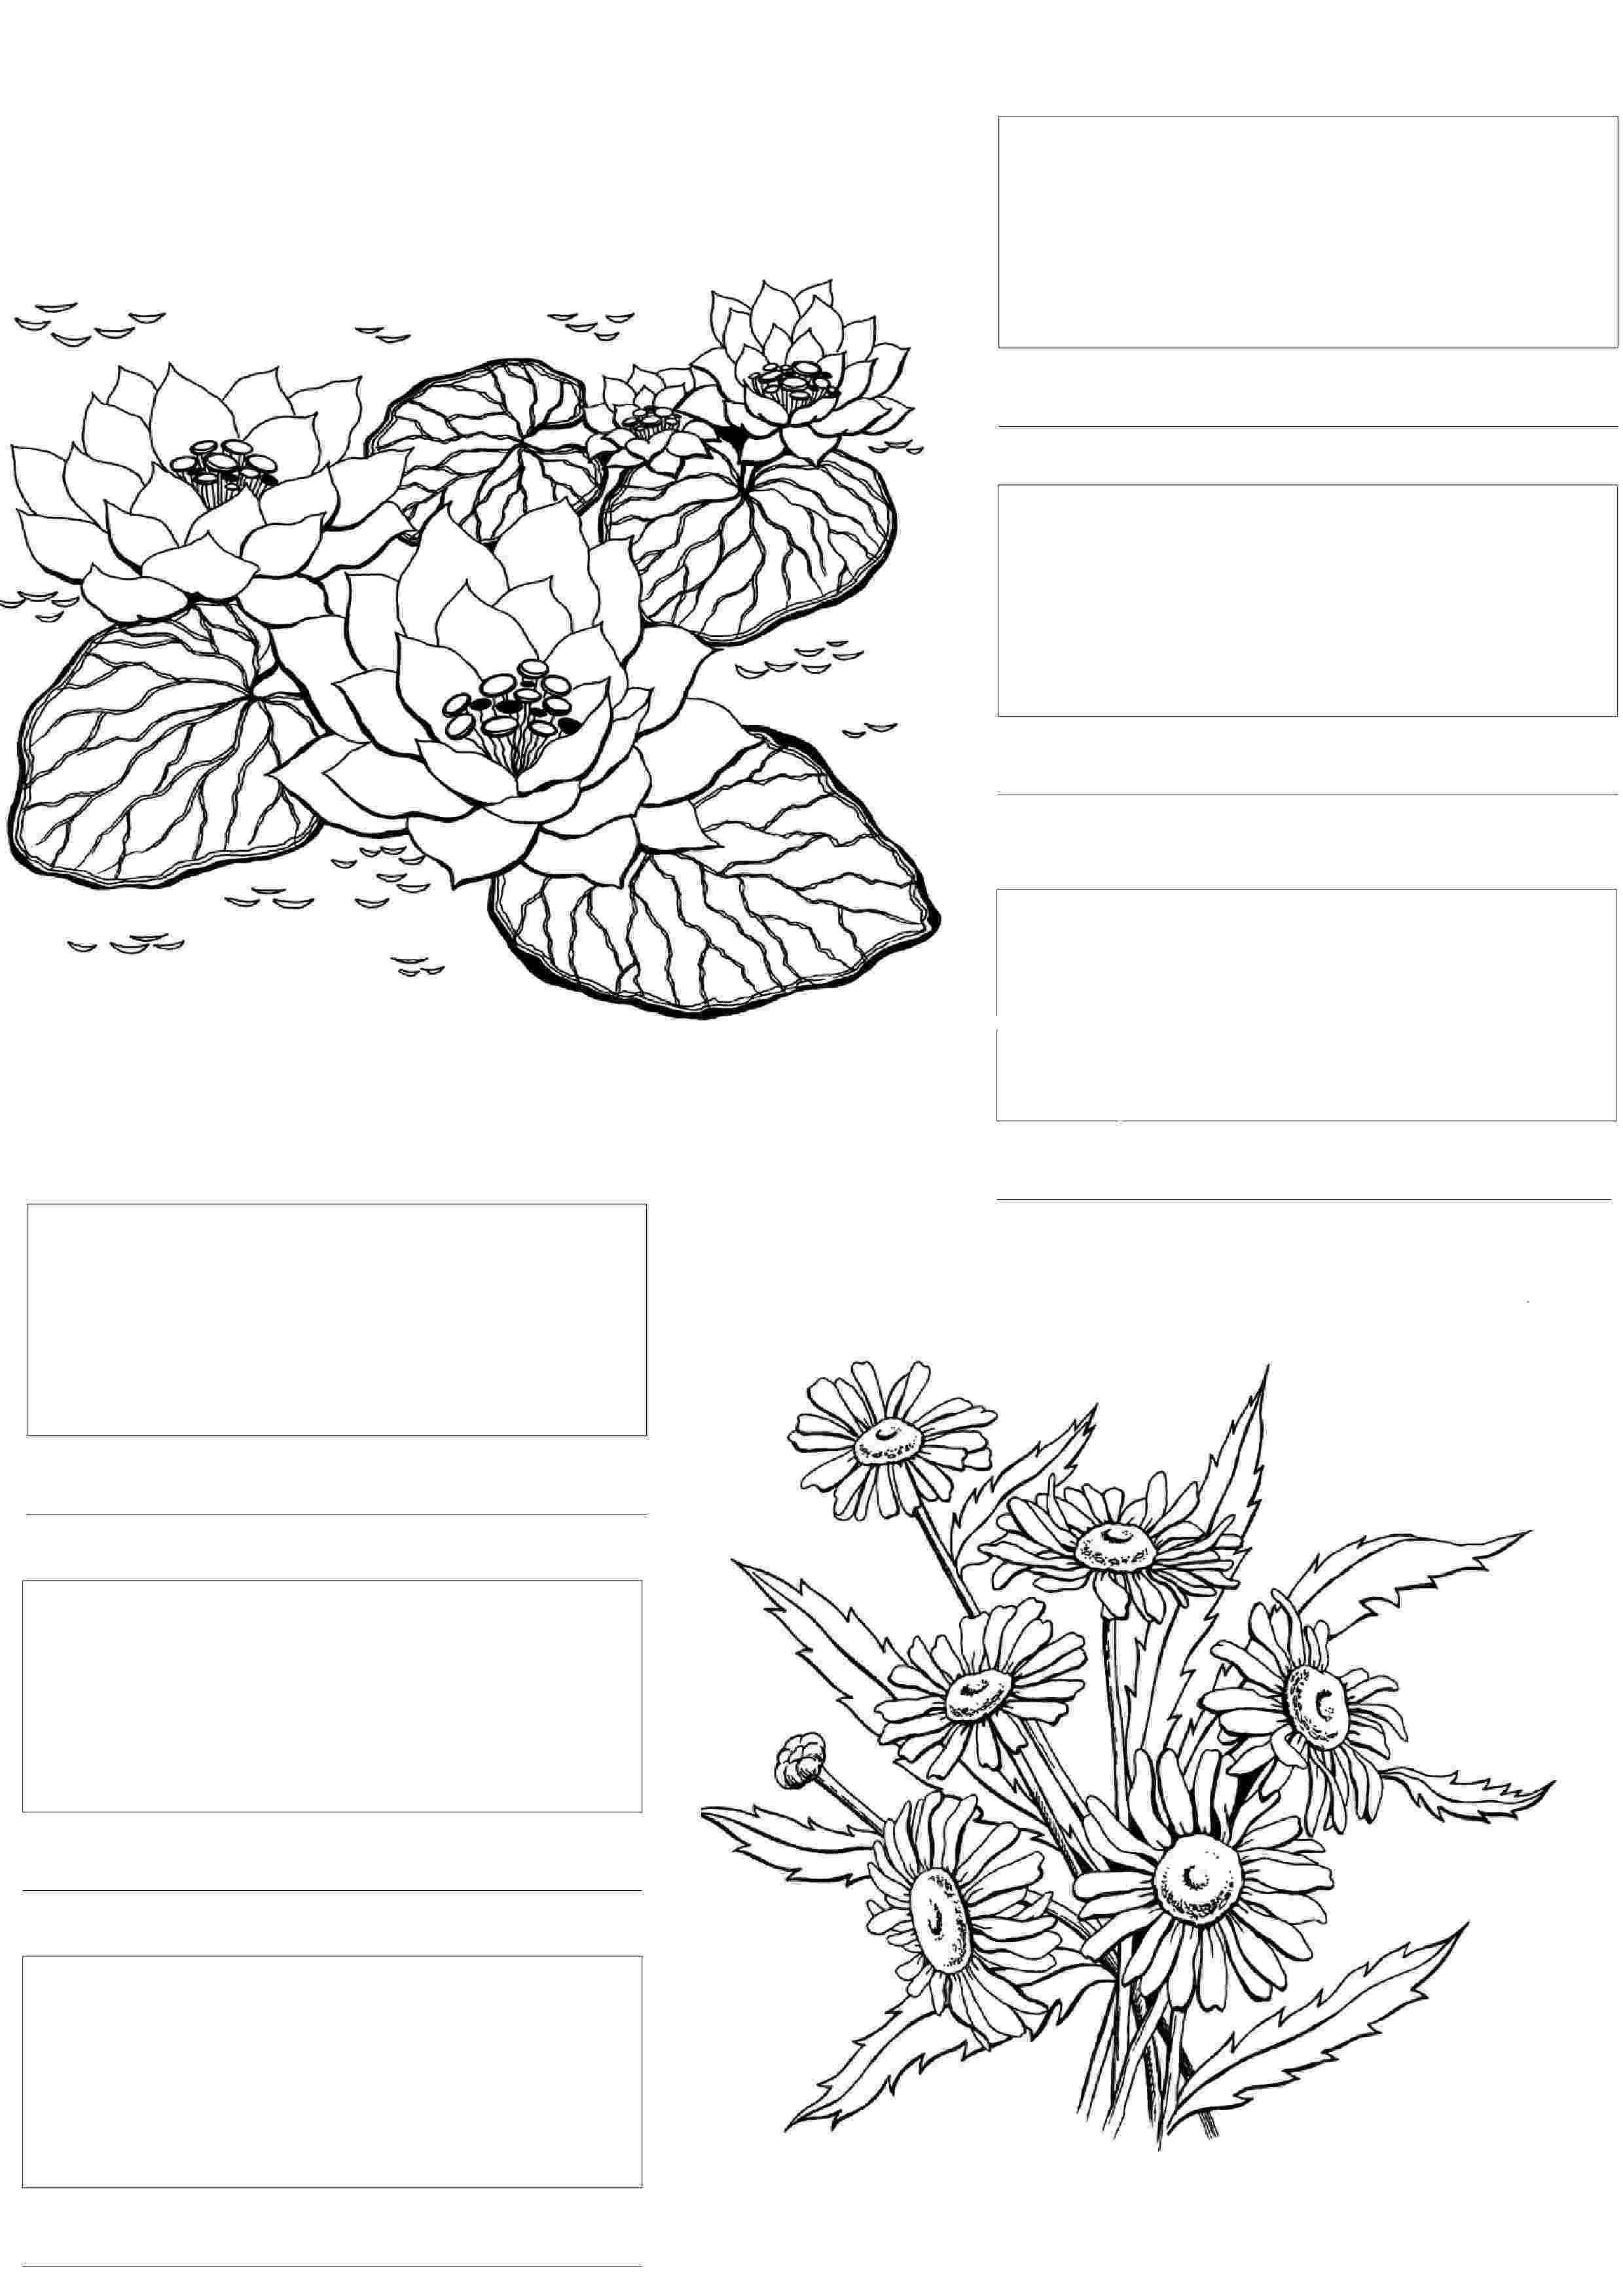 coloring flowers copic book beccy39s place bucket of blossoms flower coloring pages coloring flowers copic book 